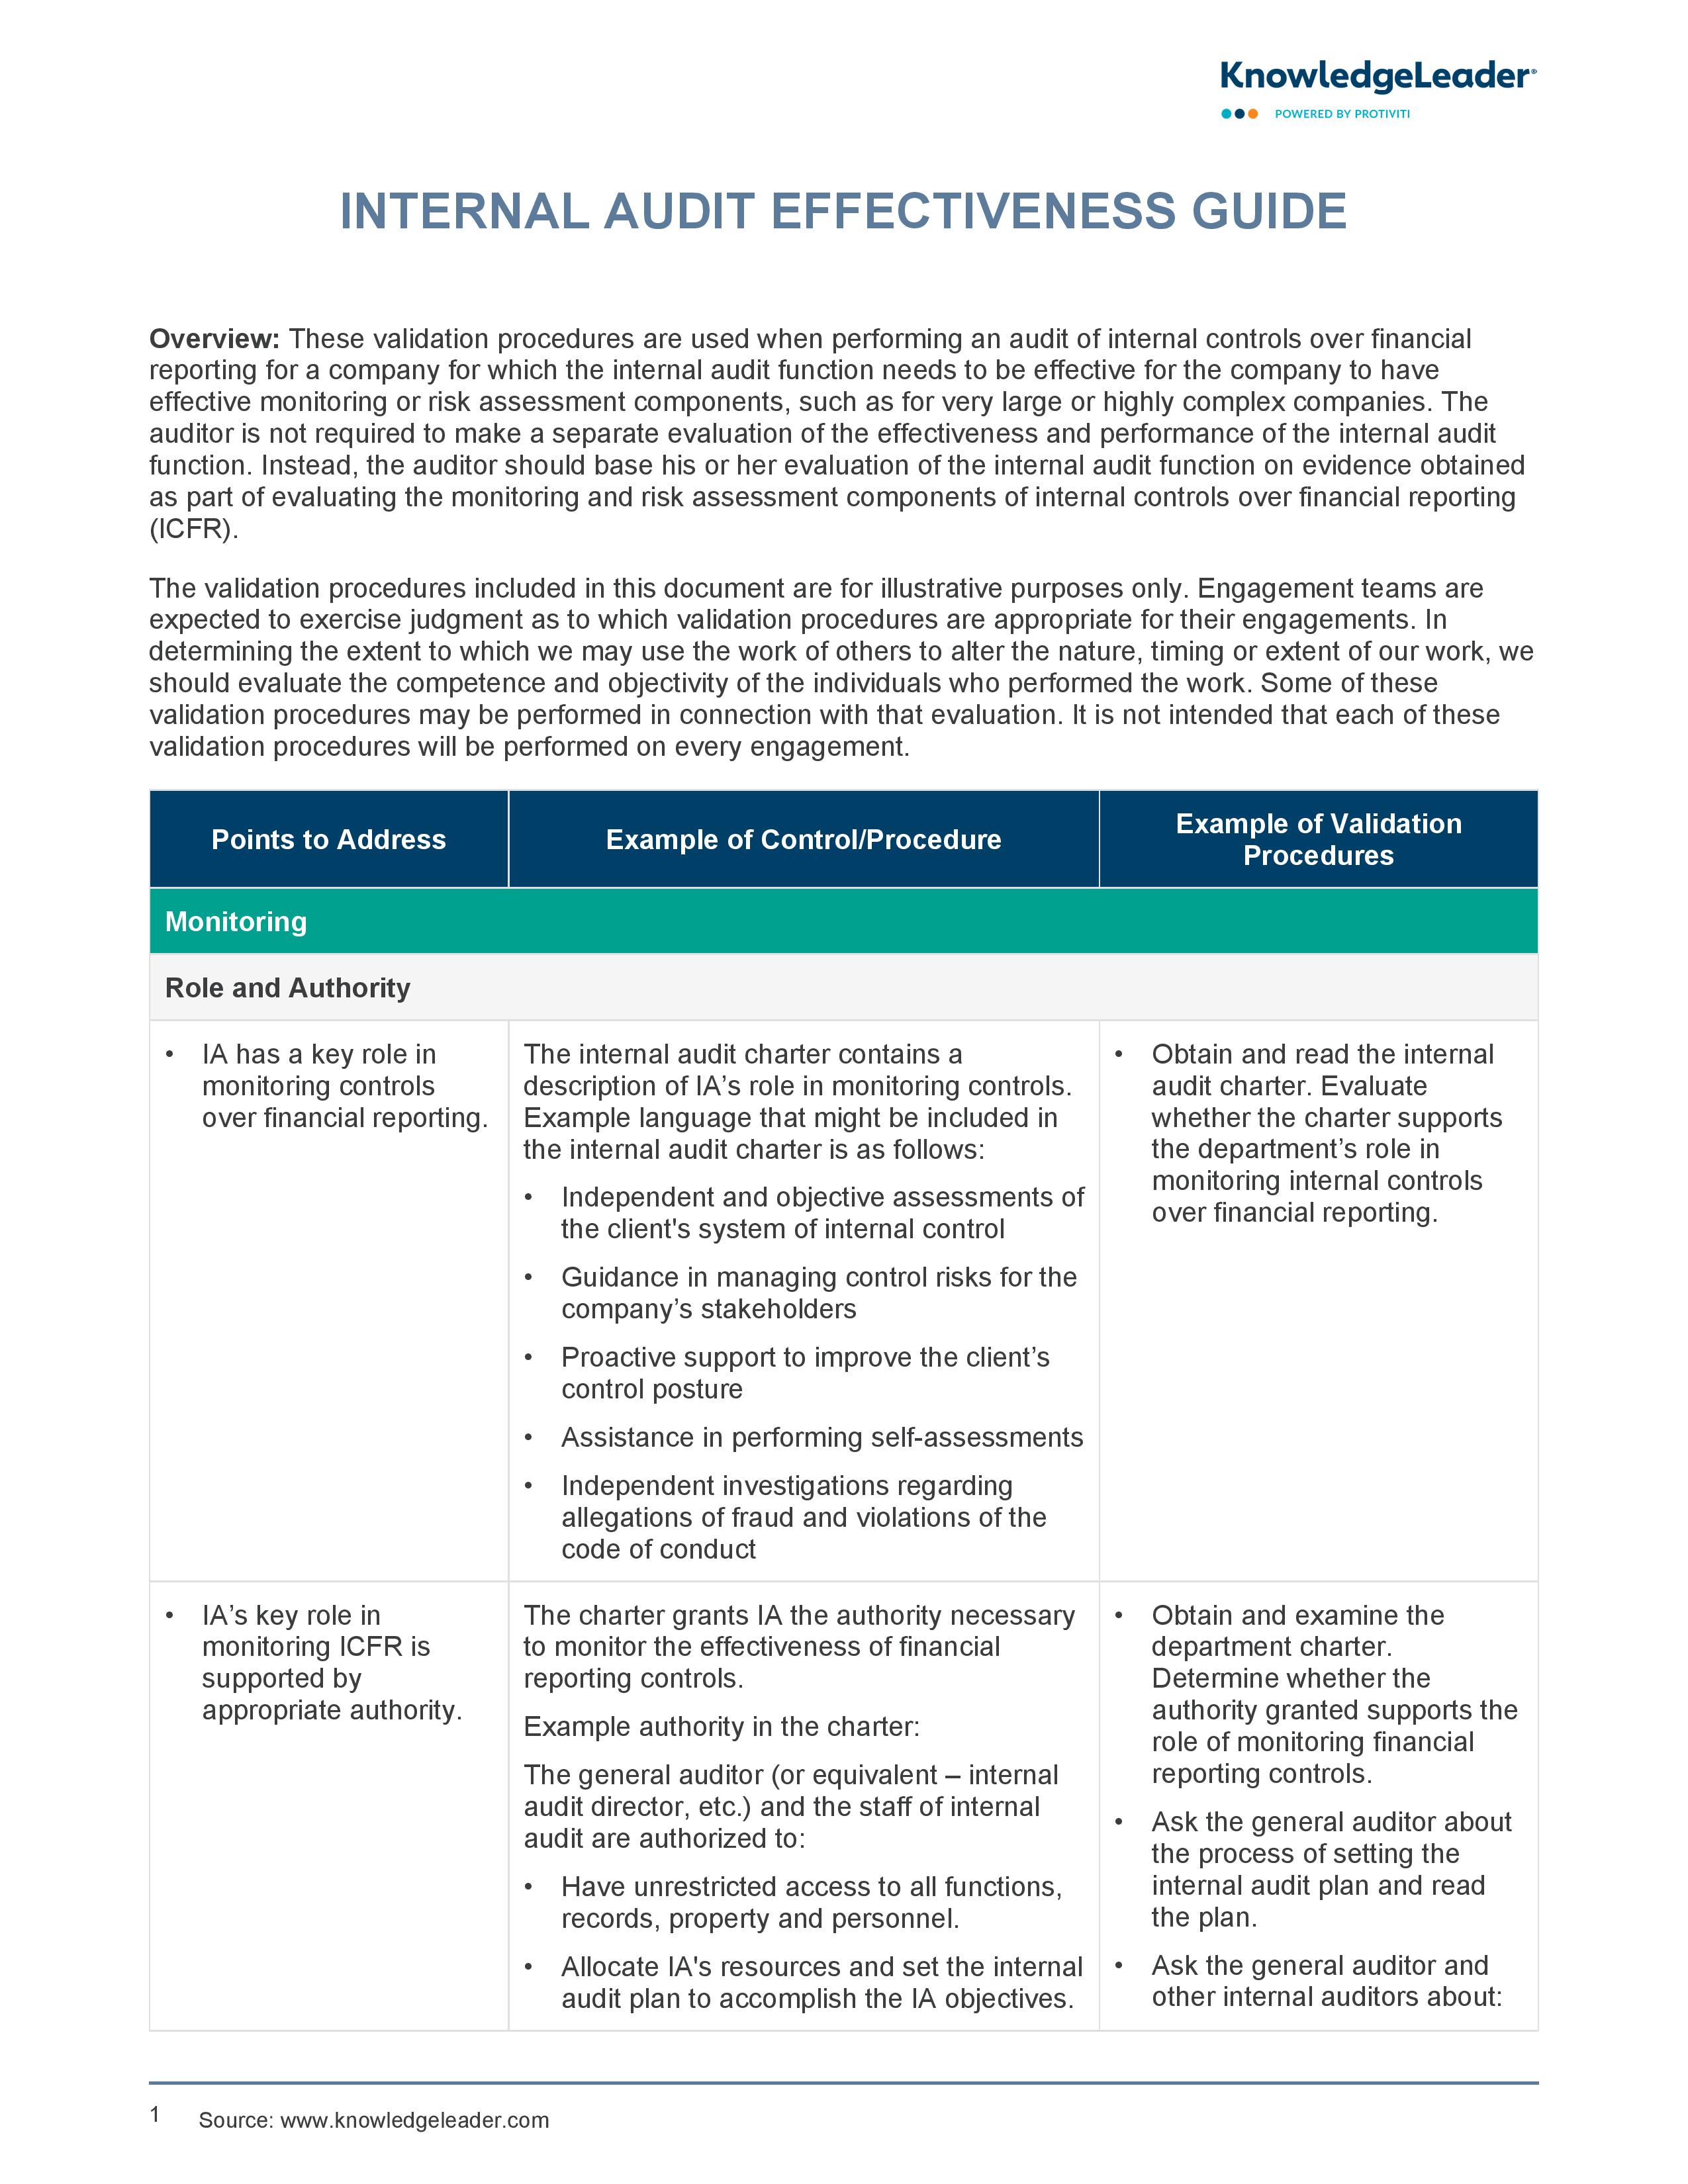 screenshot of the first page of Internal Audit Effectiveness Guide